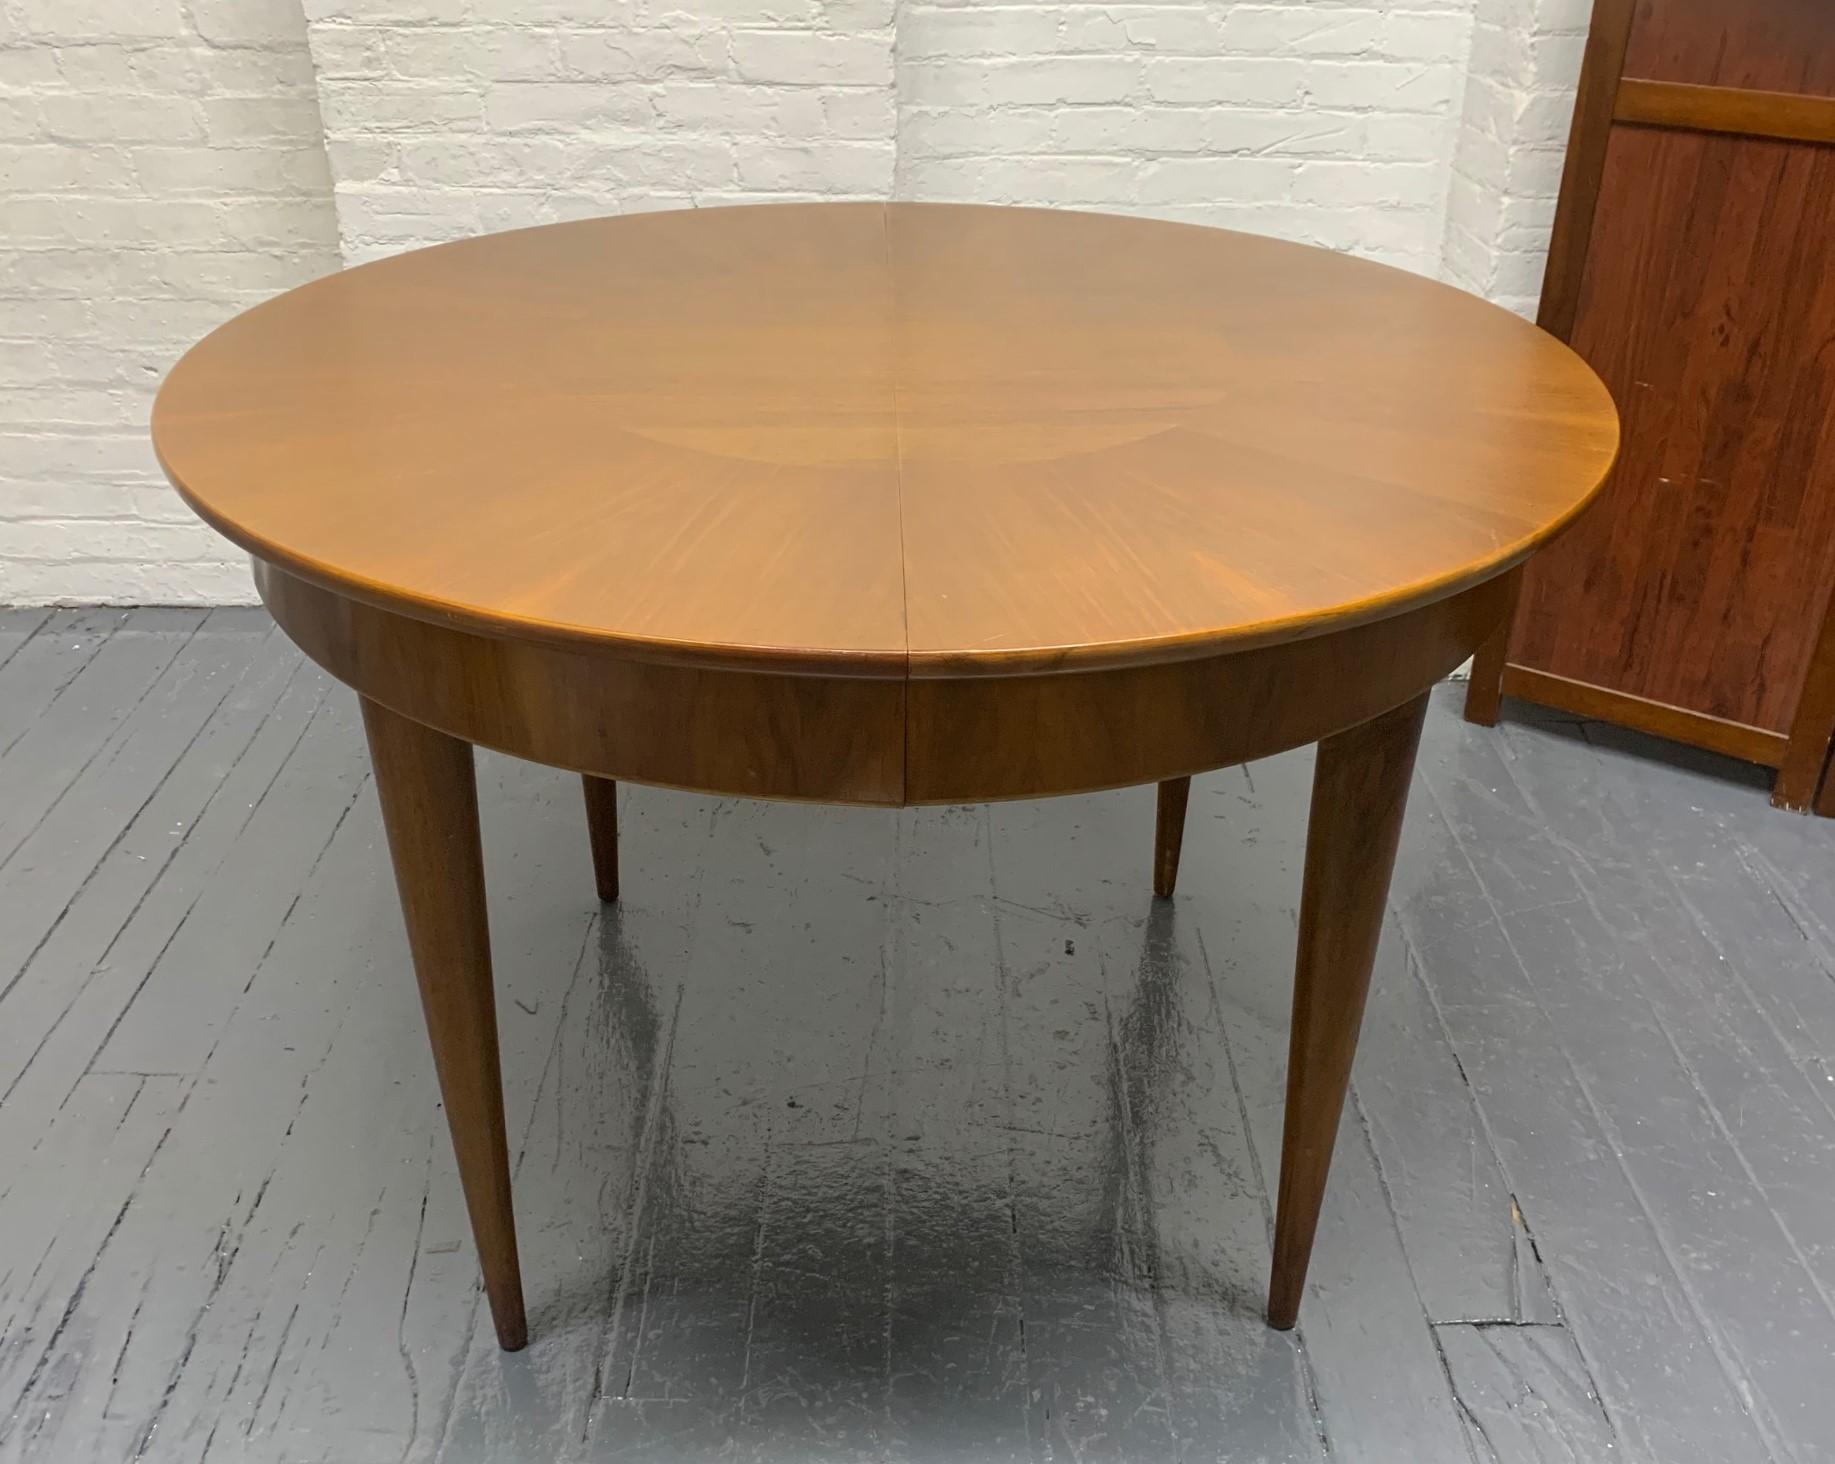 Mid-Century Modern dining table with three extension leaves. Nice walnut grain with eight tapered legs. 
Fully extended: 101 W x 43 D x 29.5 H. 
Each leaf is 19.5 W
Table without leaves: 43